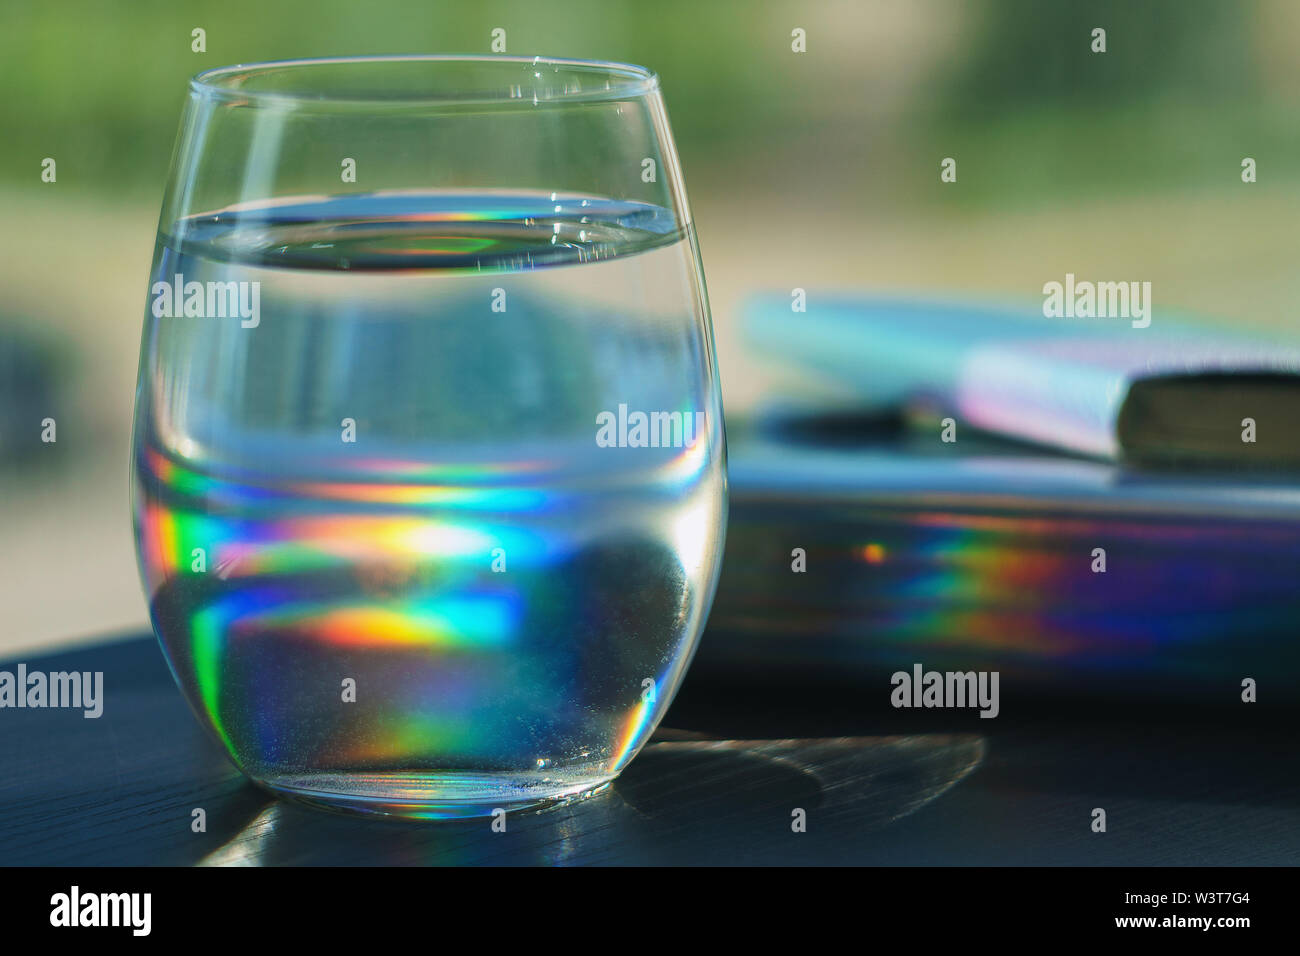 Transparent glass filled with water reflecting rainbow spots from a notebook in silver holographic cover Stock Photo